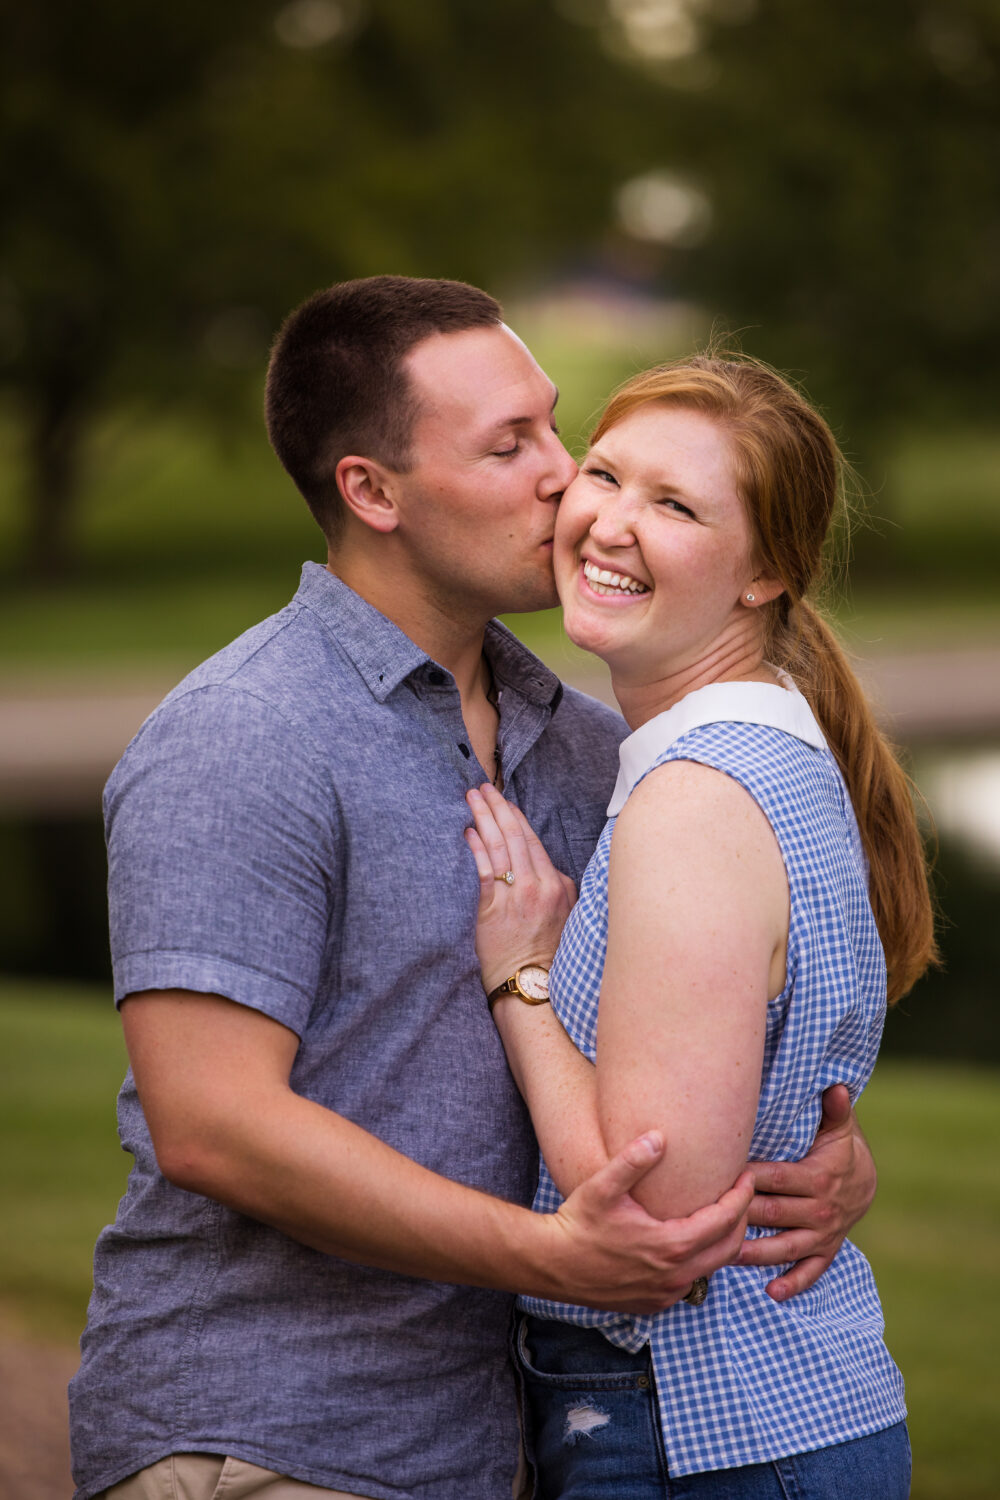 traditional image of the couple embracing one another and showing off the new ring and smiling from ear to ear as he kisses her on the forehead captured by surprise proposal photographer, lisa rhinehart at the Missouri botanical gardens 